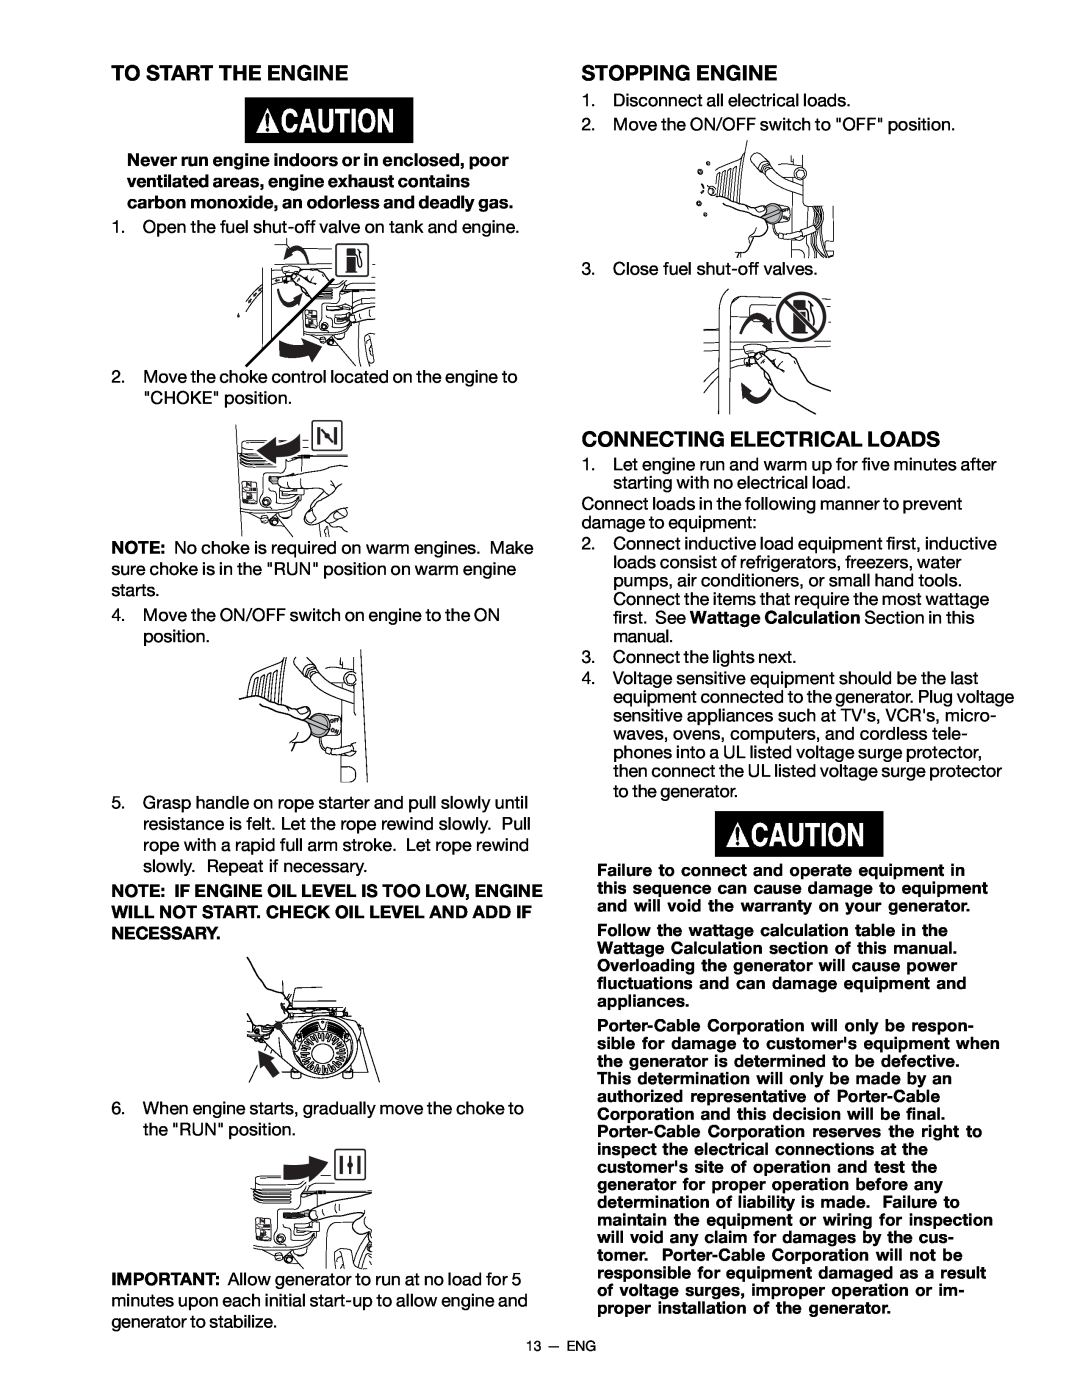 Porter-Cable H450CS, CH350CS, H650CS instruction manual To Start The Engine, Stopping Engine, Connecting Electrical Loads 